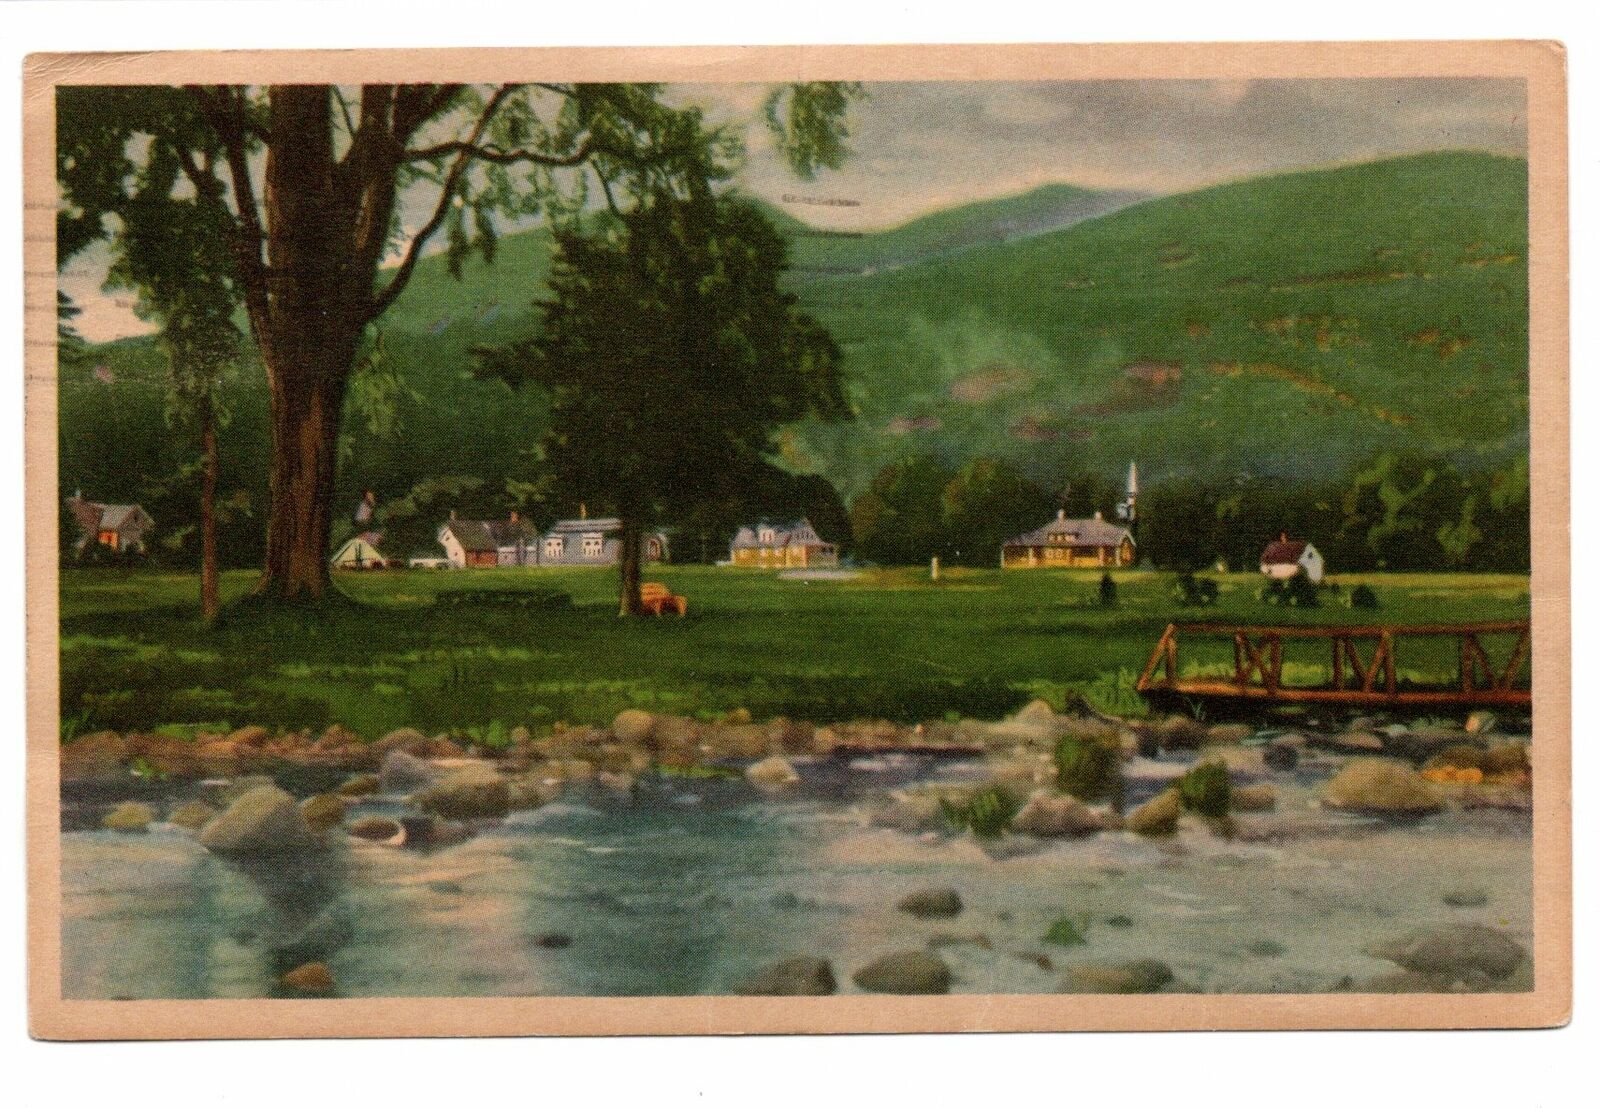 Country Landscape Postcard Postmarked 1948